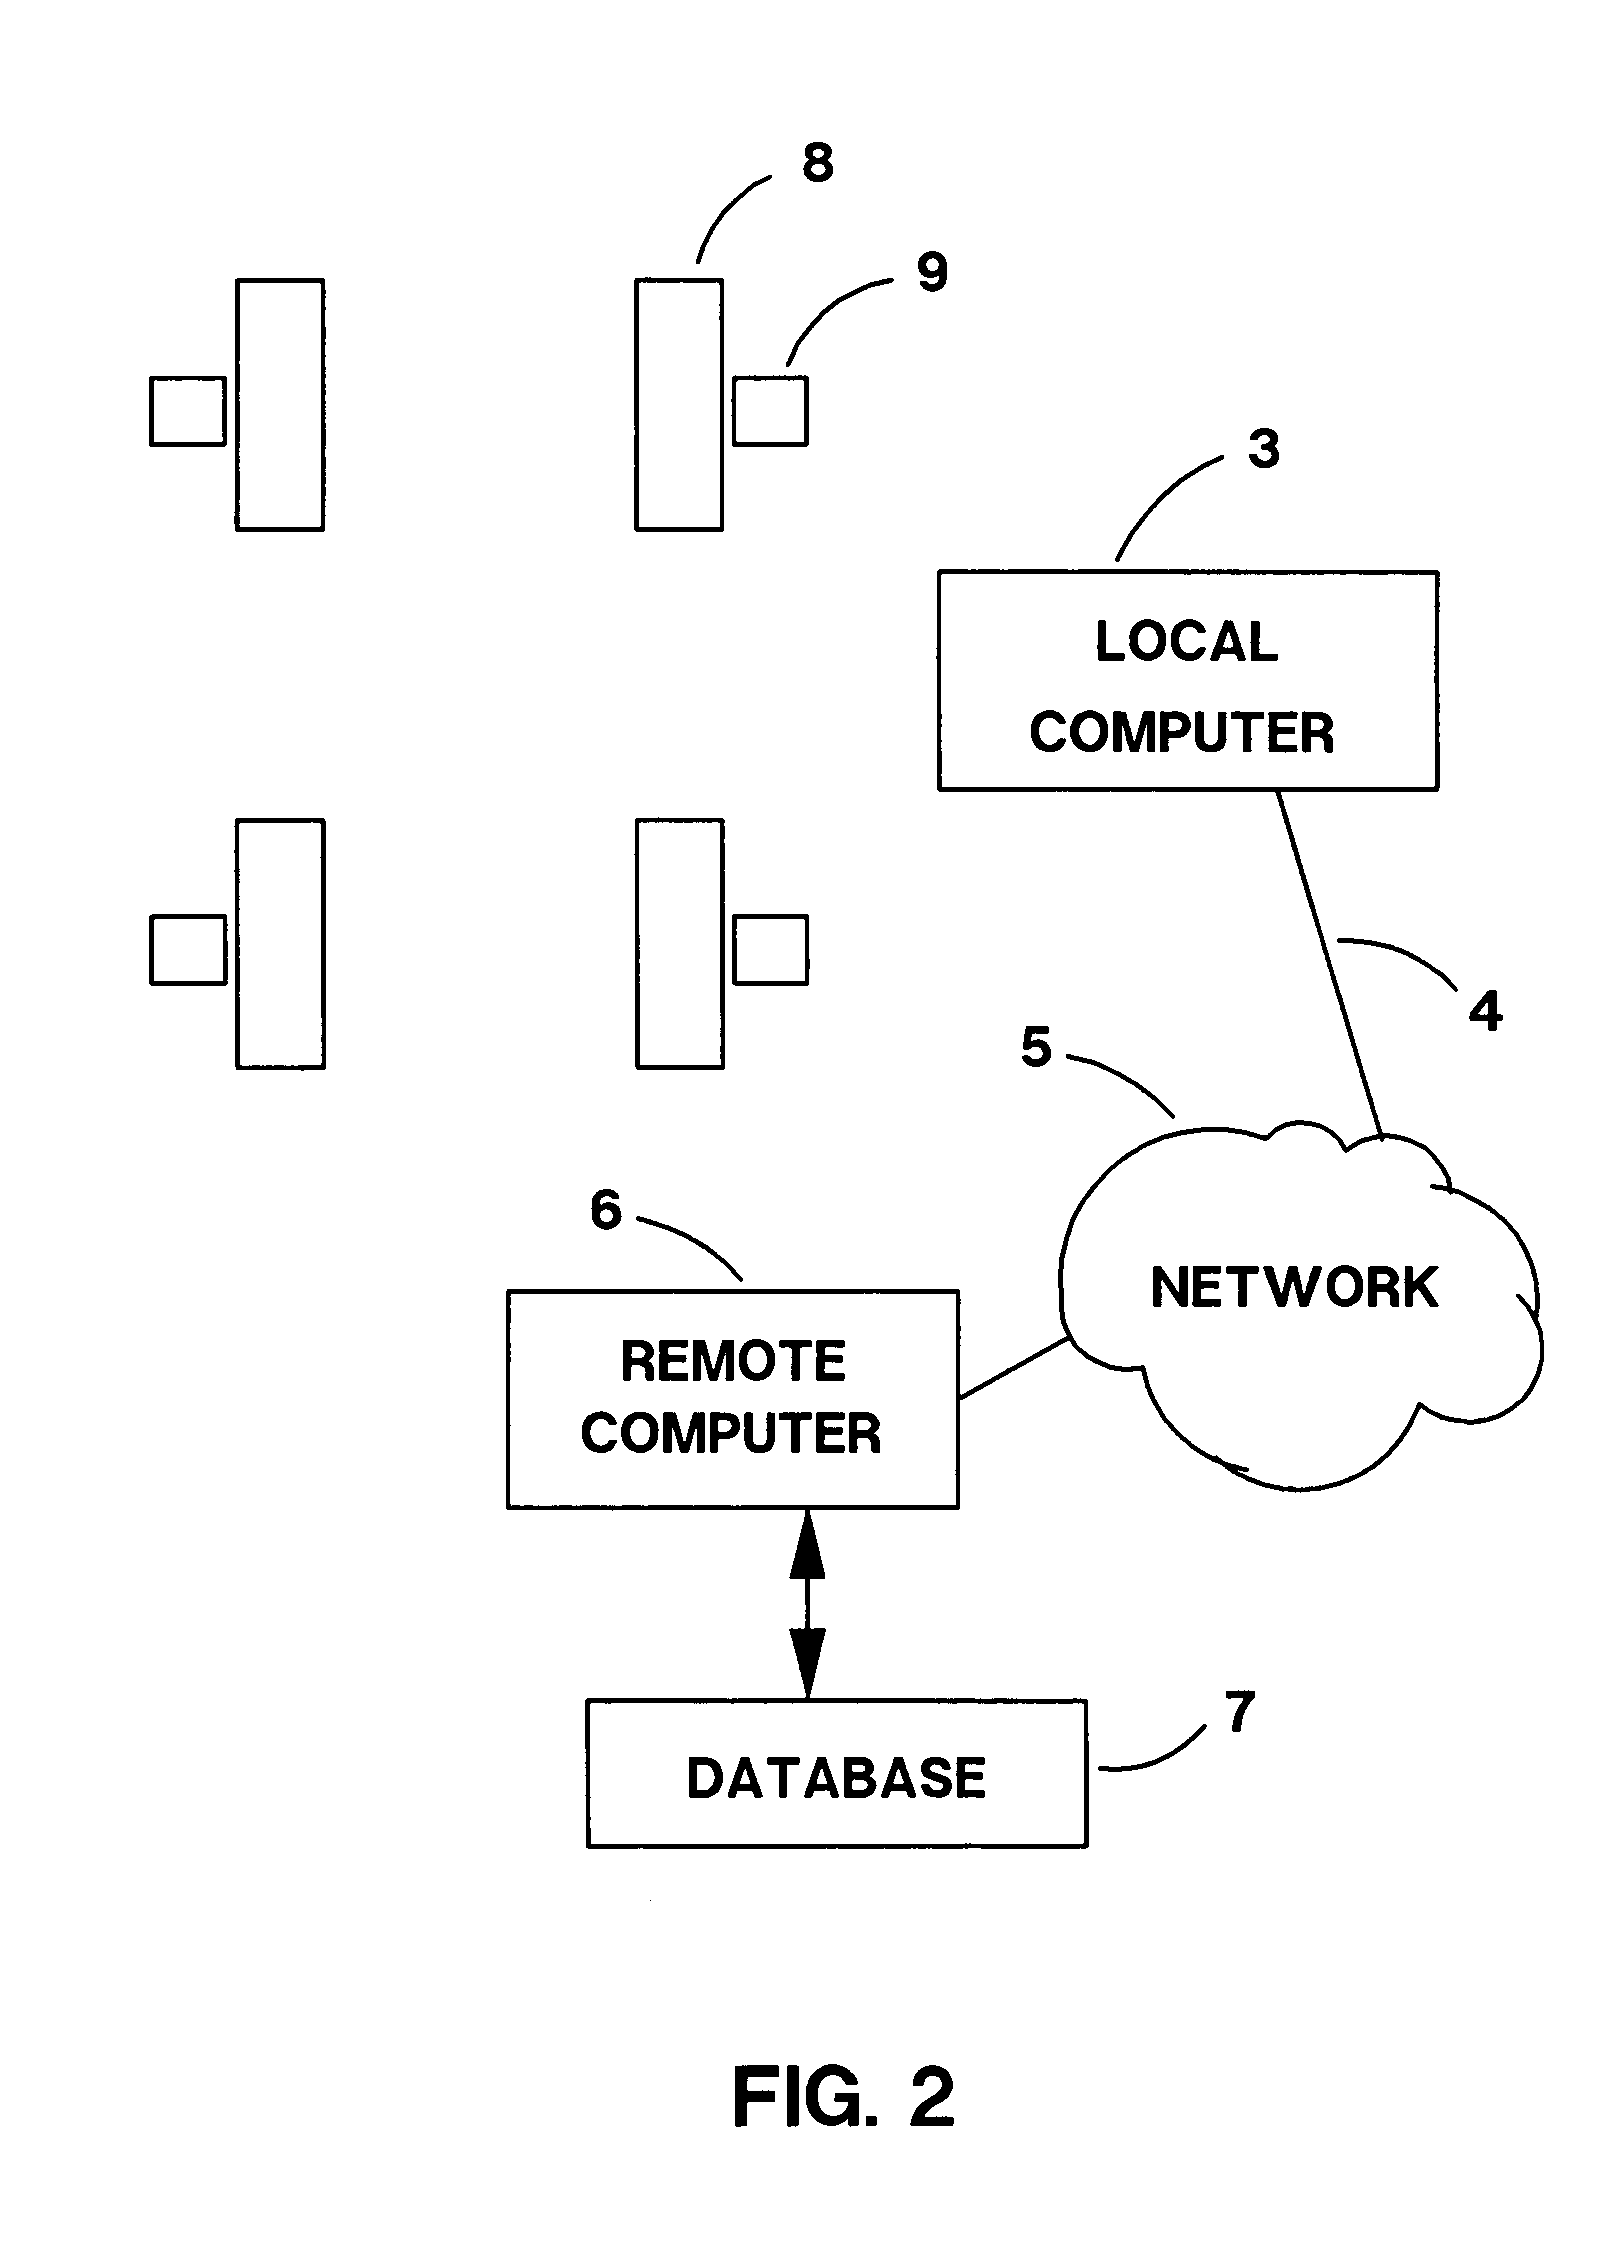 Network coupled diagnosis and maintenance system